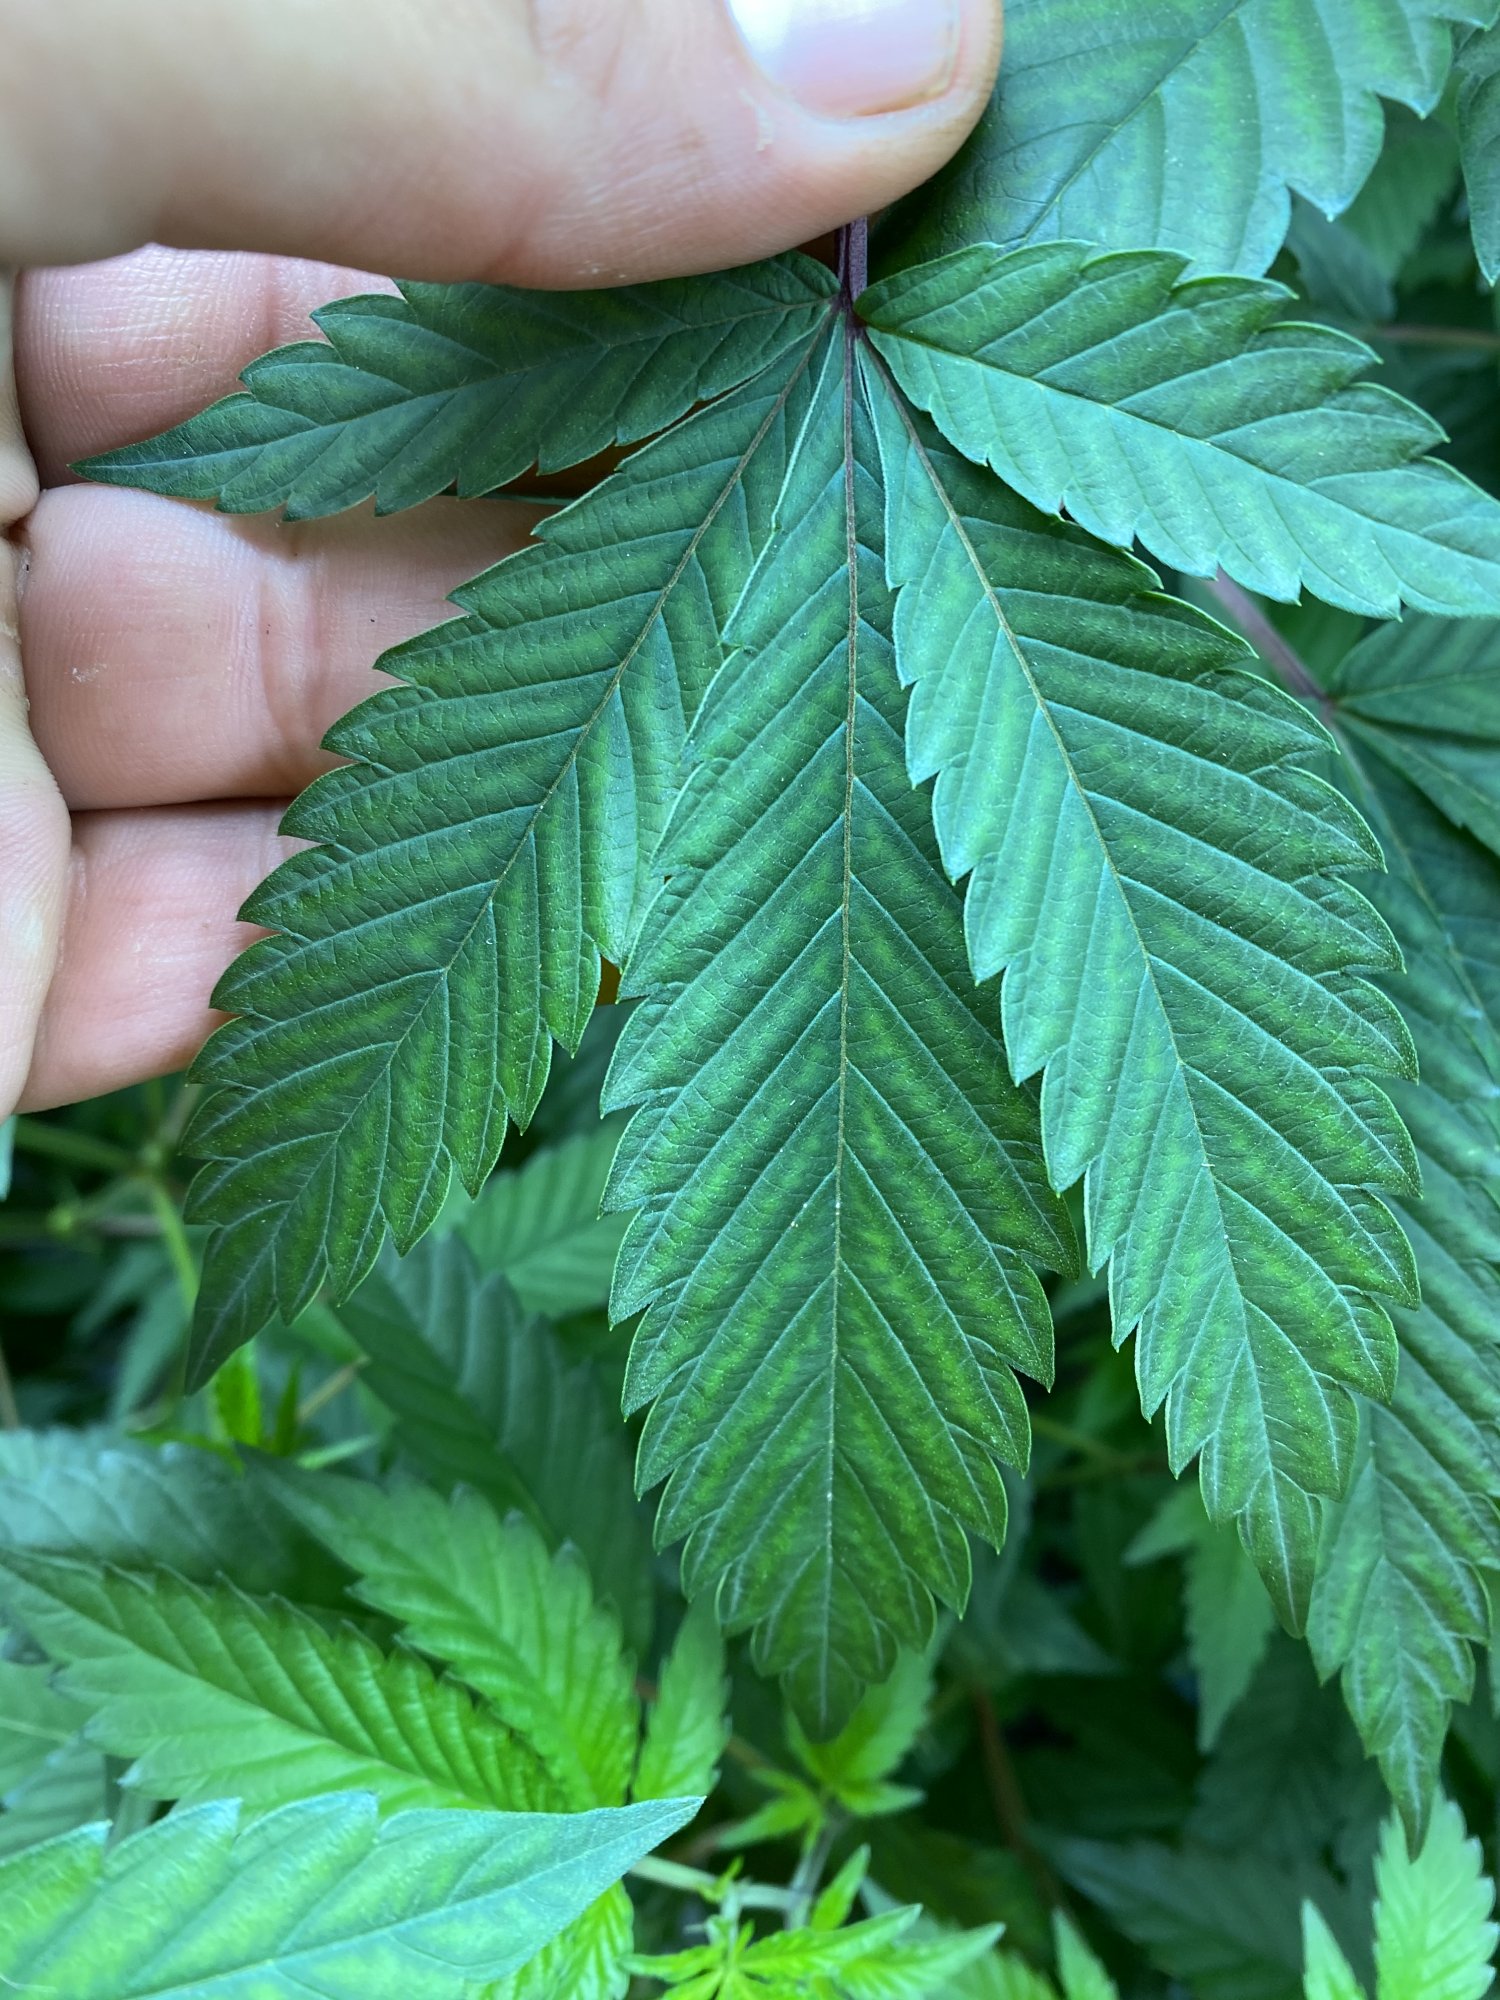 Second opinion on deficiency 2